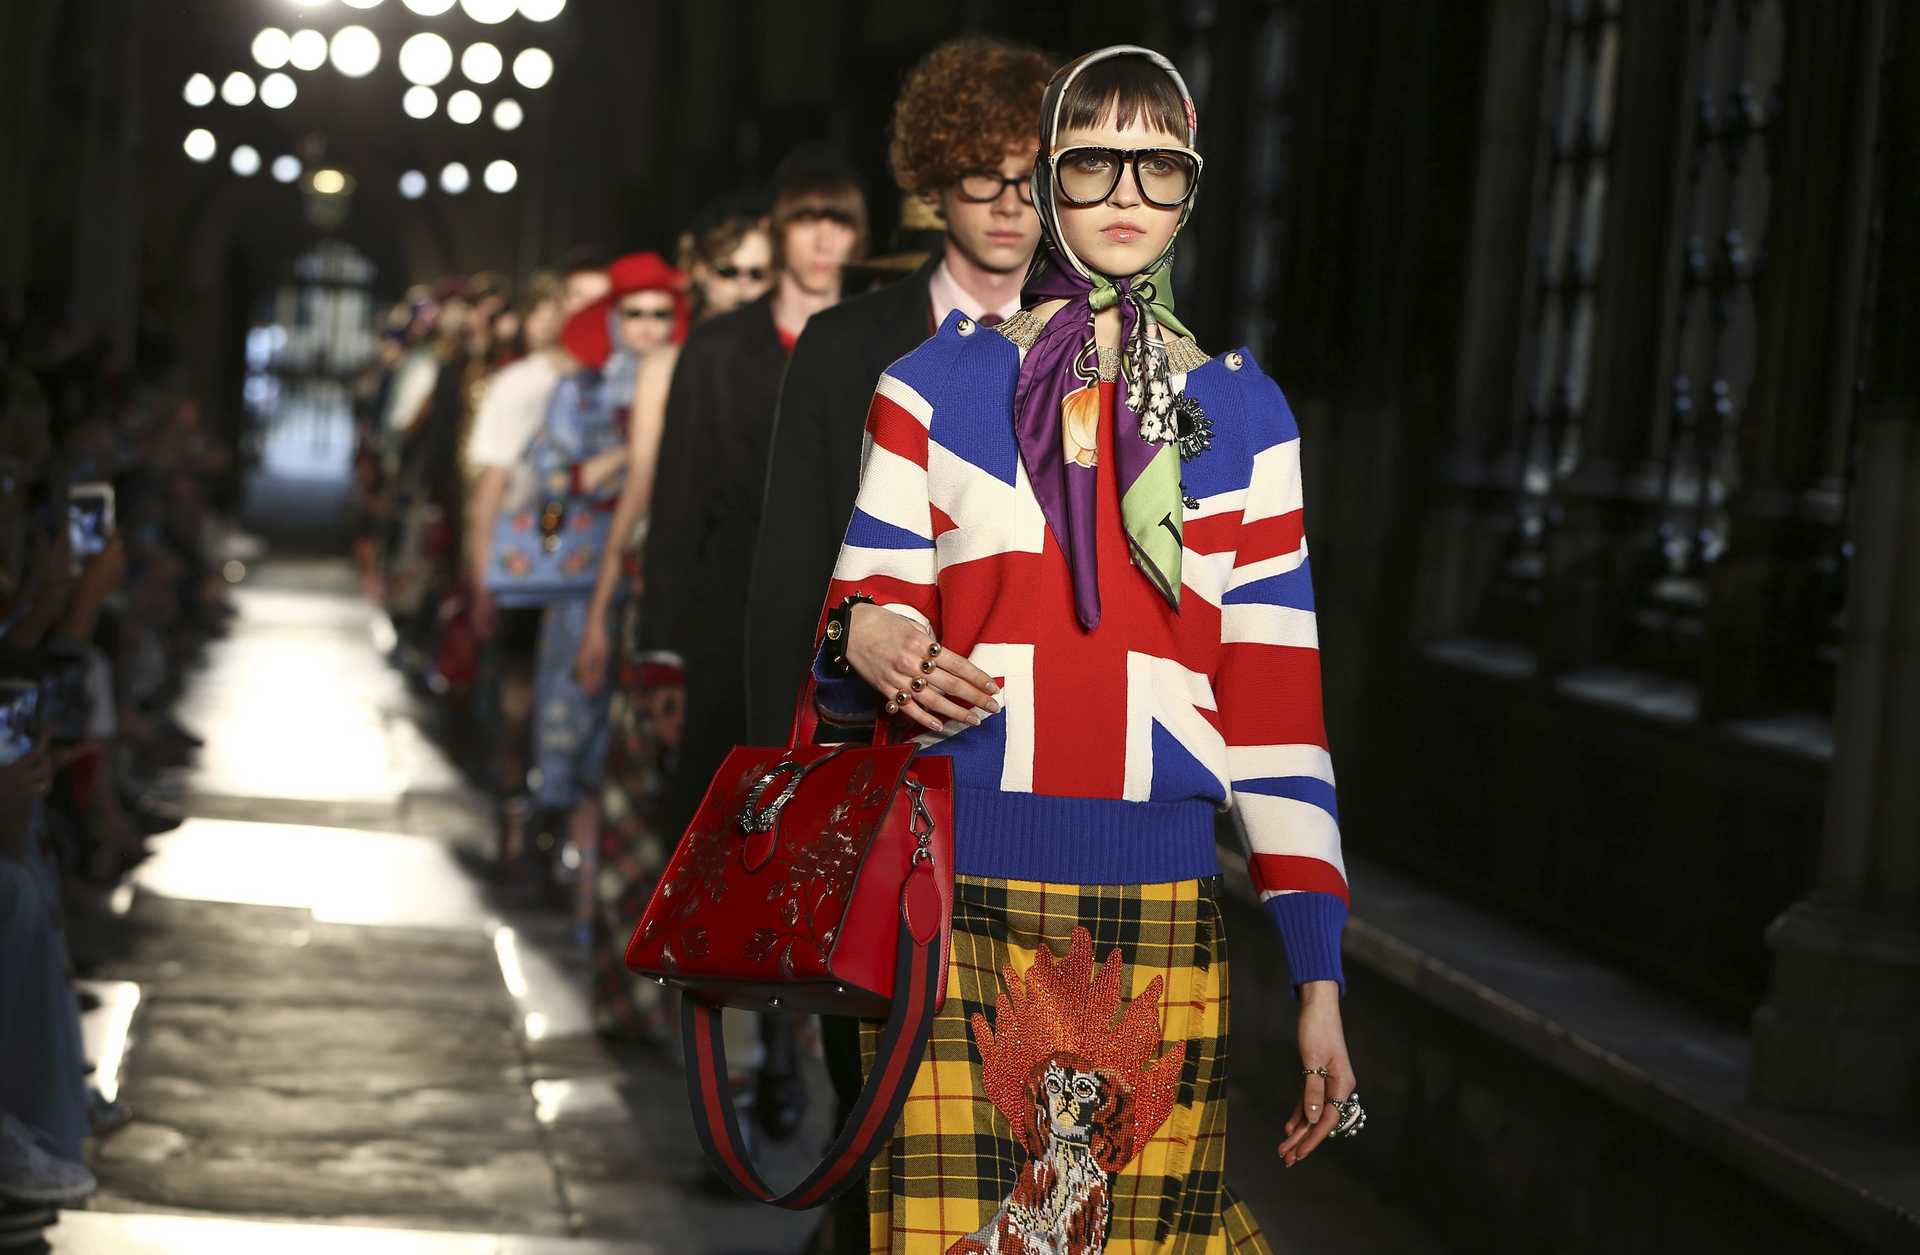 Models presents creations by Gucci at a catwalk show in the cloisters of Westminster Abbey in London